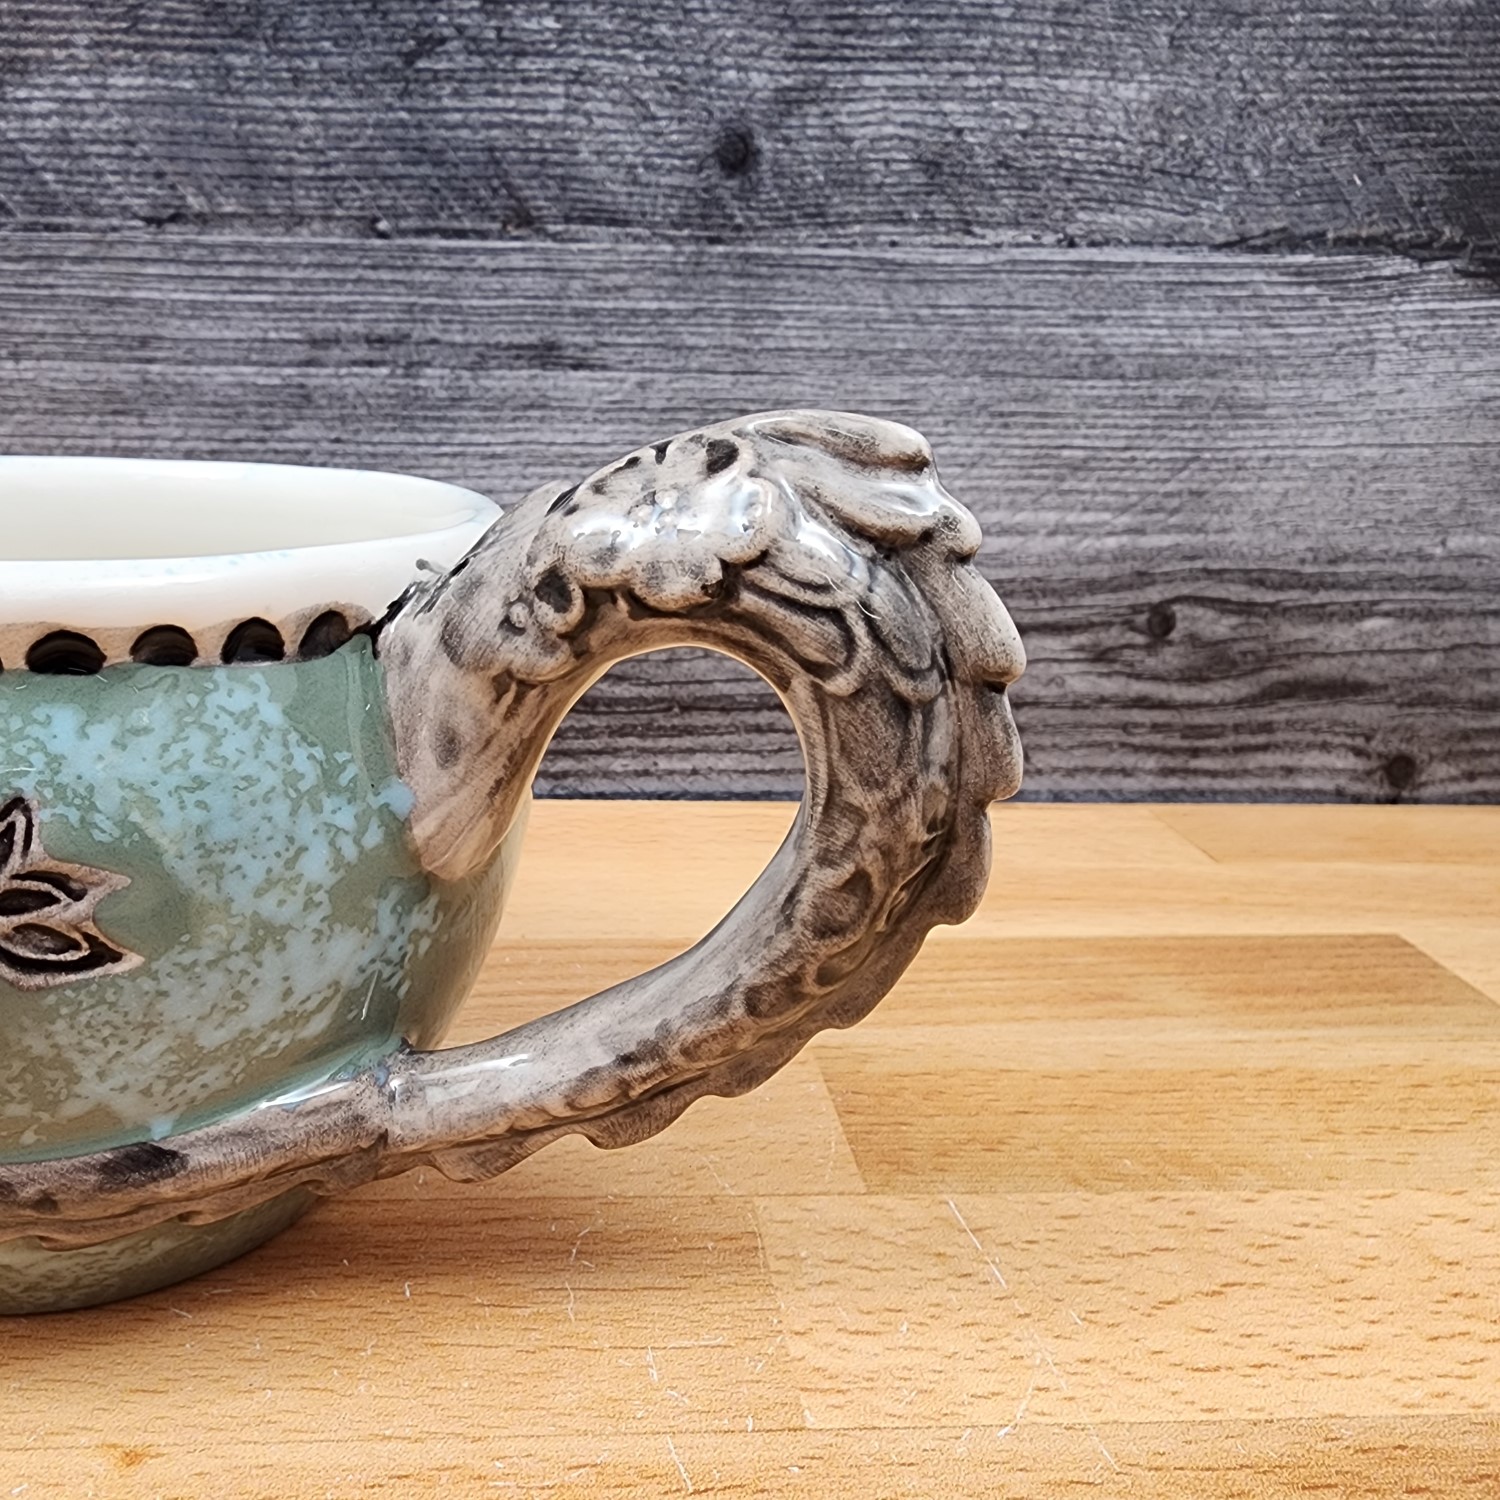 This Green Dragon Decorative Coffee Mug by Blue Sky Heather Goldminic Tea Cup is made with love by Premier Homegoods! Shop more unique gift ideas today with Spots Initiatives, the best way to support creators.